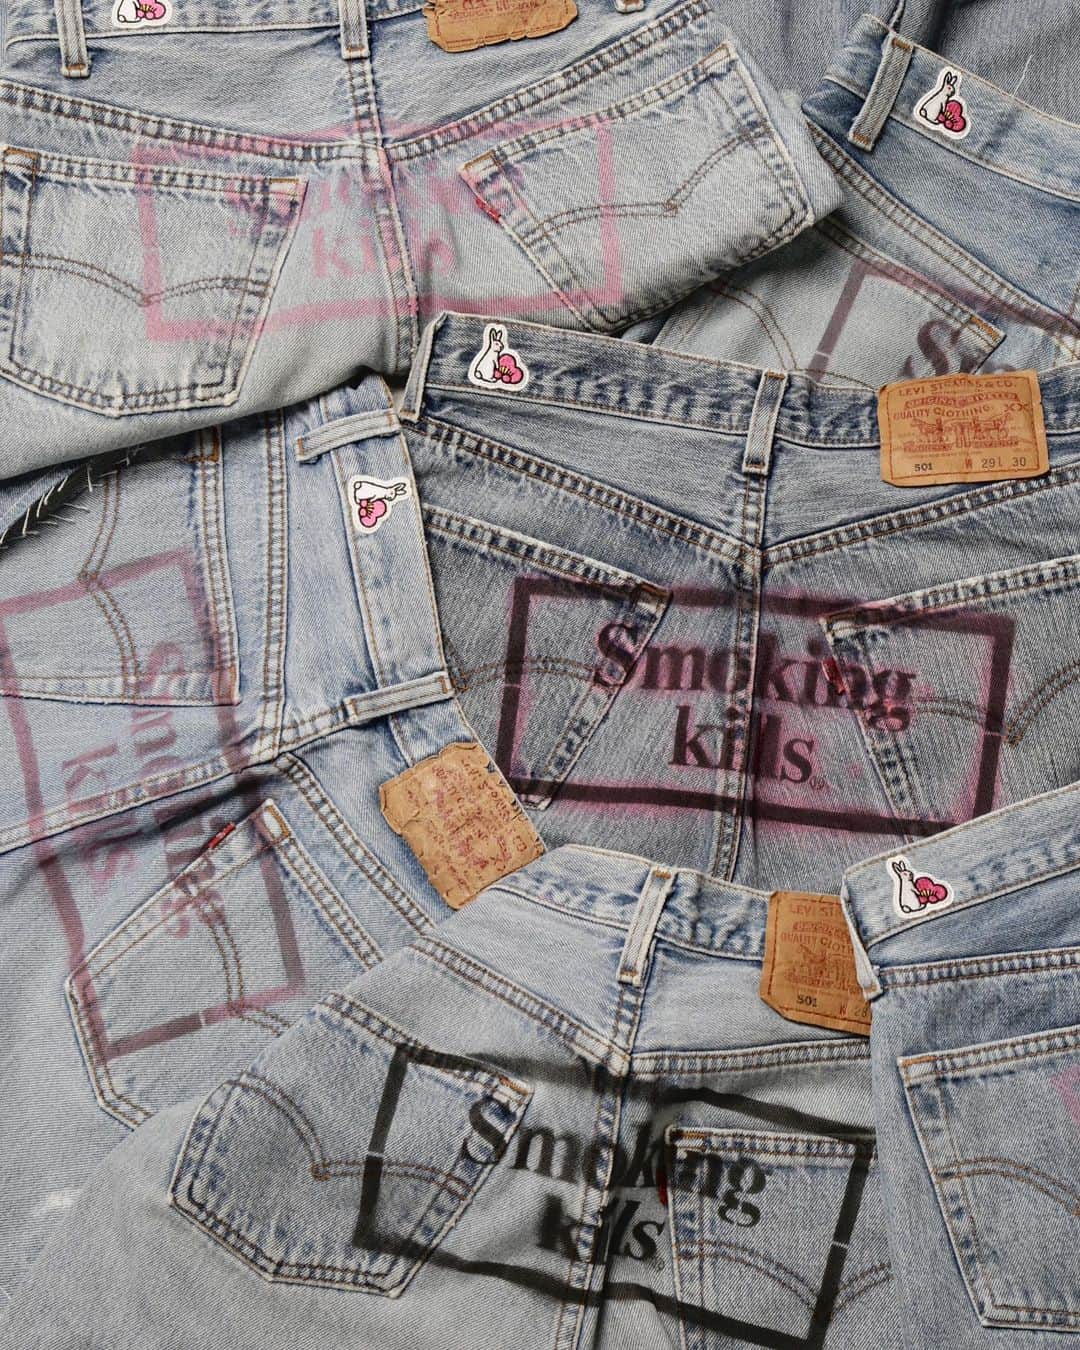 #FR2梅(UME)のインスタグラム：「#FR2梅　5周年記念に伴いSmoking kills ®︎ UsedDenimを店舗限定で販売を致します。  #FR2梅 5周年記念  "Limited Used Denim Smoking kills®︎ " ( ショートパンツ&ハーフパンツ )  ■発売詳細 #FR2梅店 2023/7/21（Fri） OPEN ※店舗での販売は購入制限を設ける場合があります。  #FR2ume We will be selling Smoking kills ®︎ UsedDenim exclusively at our stores in celebration of our 5th anniversary.  #FR2梅 5th Anniversary.  "Limited Used Denim Smoking kills®︎ " ( Short Pants & Half Pants )  ■ Release Details #FR2 Ume Stores July 21, 2023 (Fri), OPEN ※ There may be purchase restrictions at physical stores.  #FR2梅5th  #fxxkingrabbits #頭狂色情兎 #smokingkills #smokingkills®」